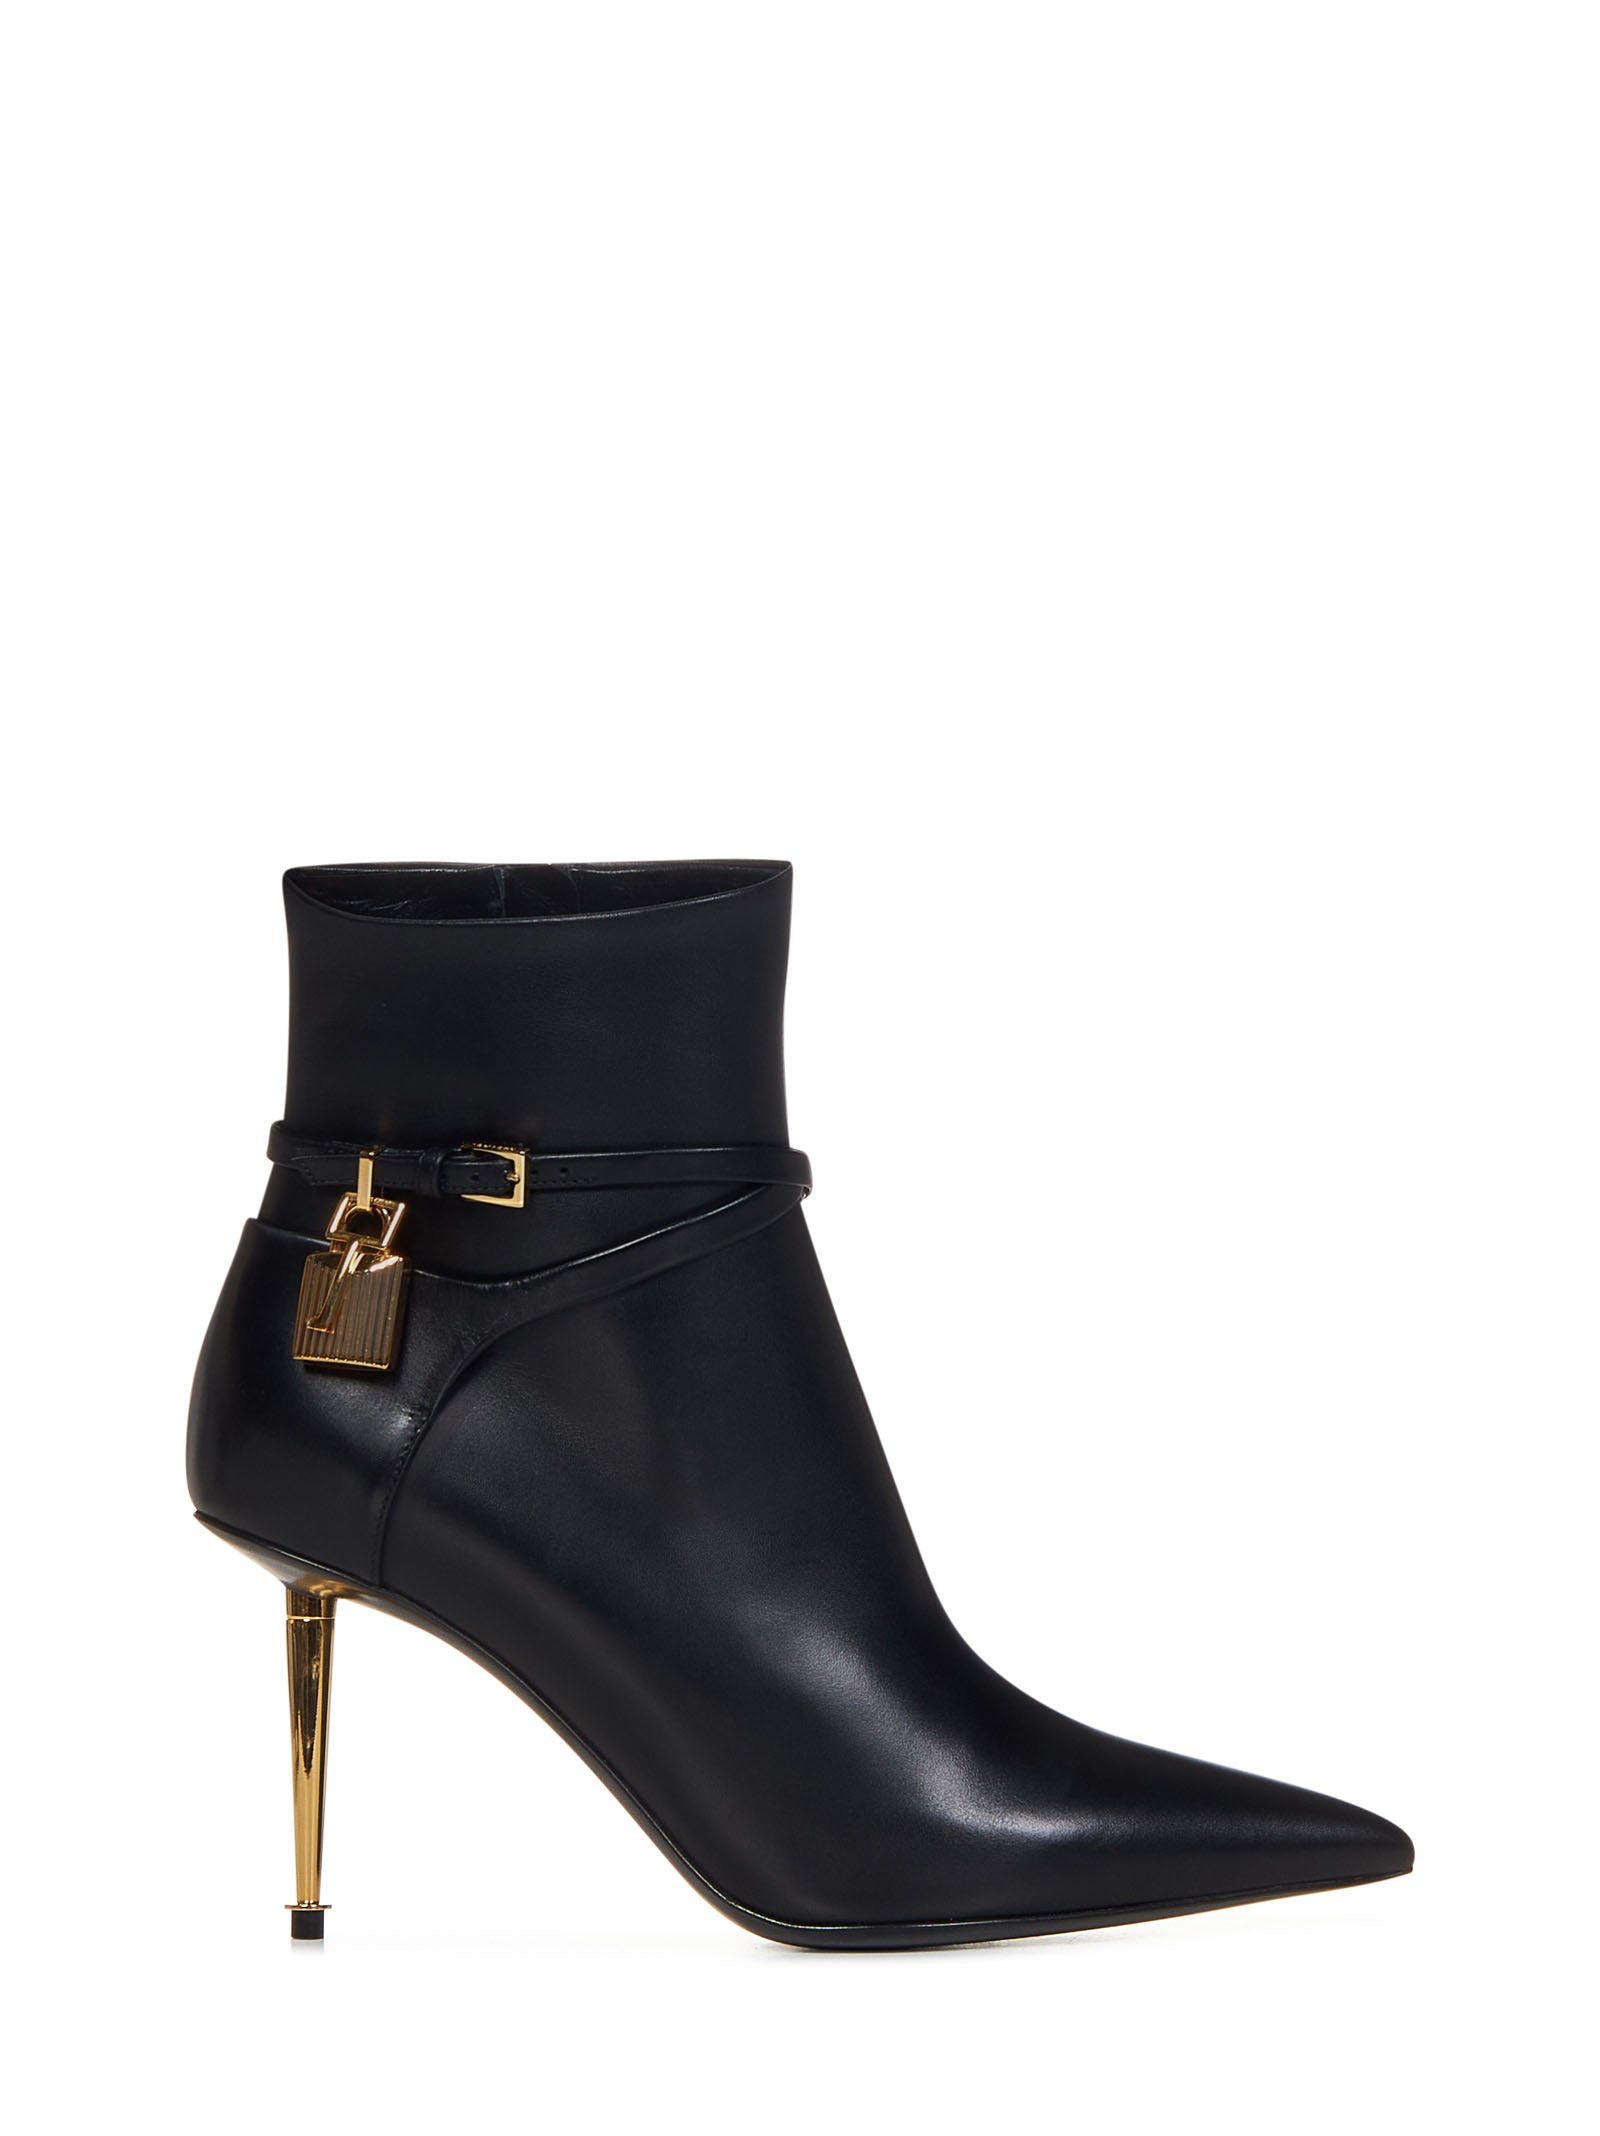 Shop Tom Ford Padlock Boots